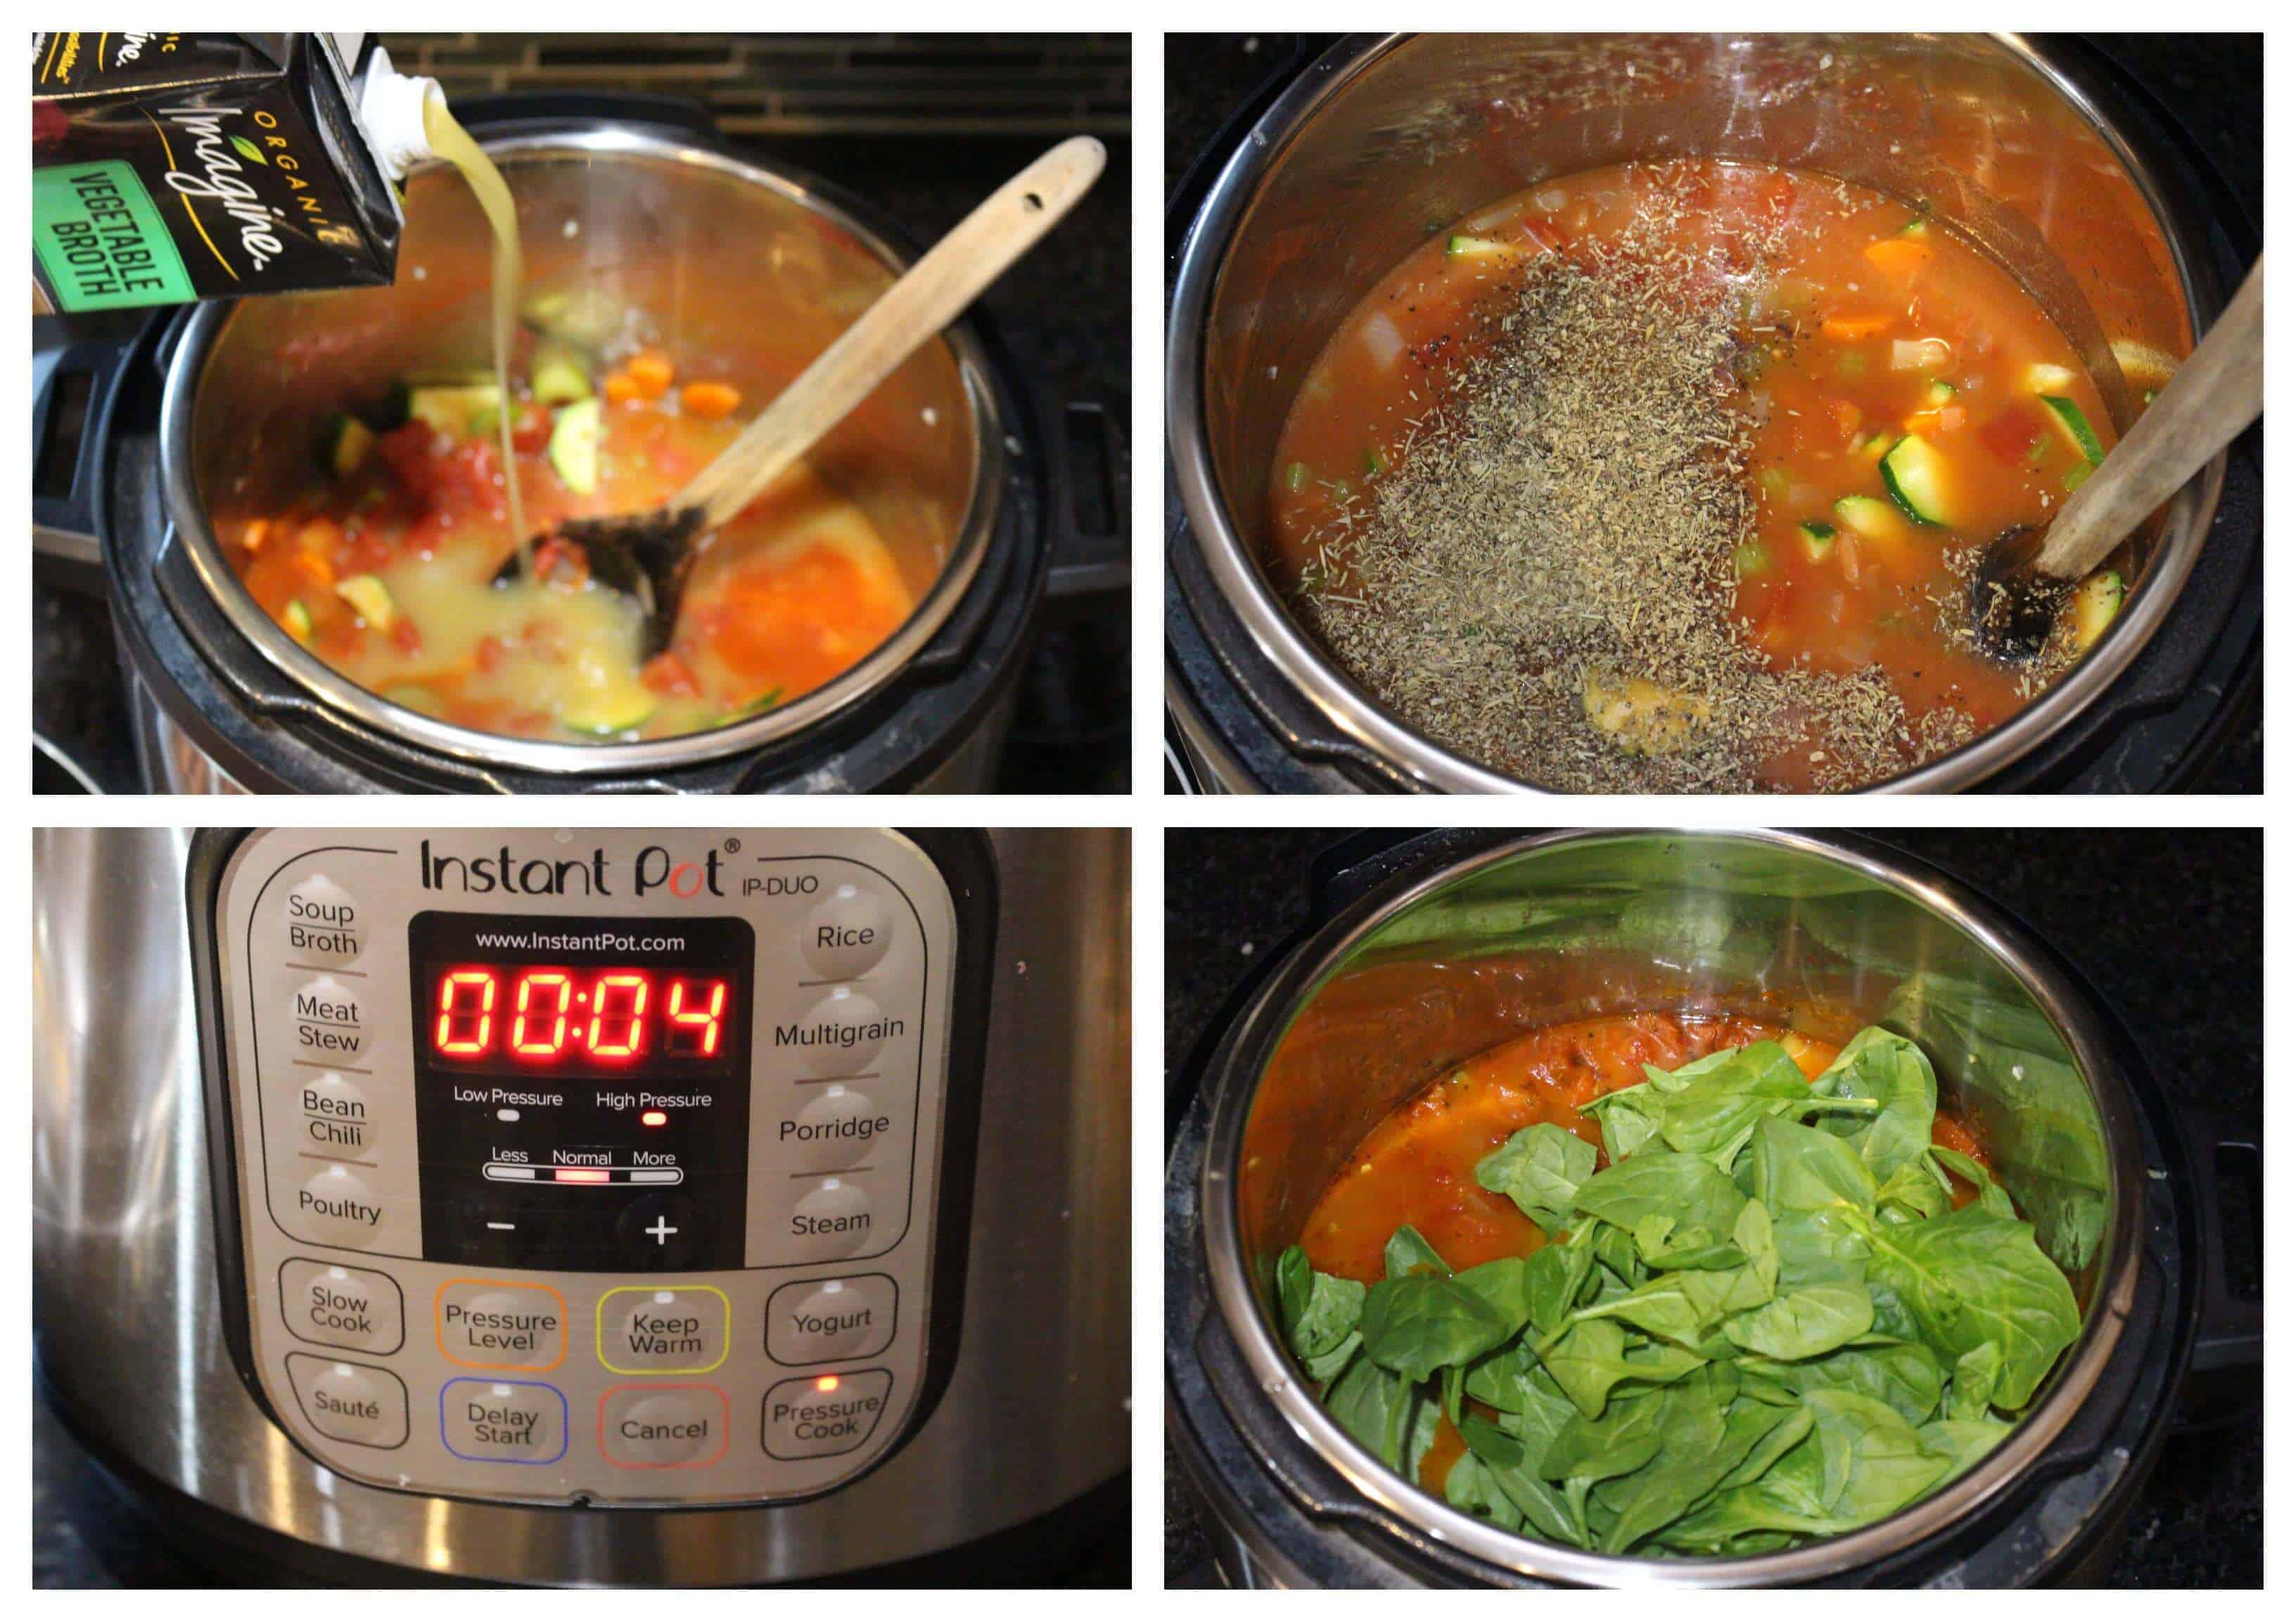 Process shot to make soup in Instant pot